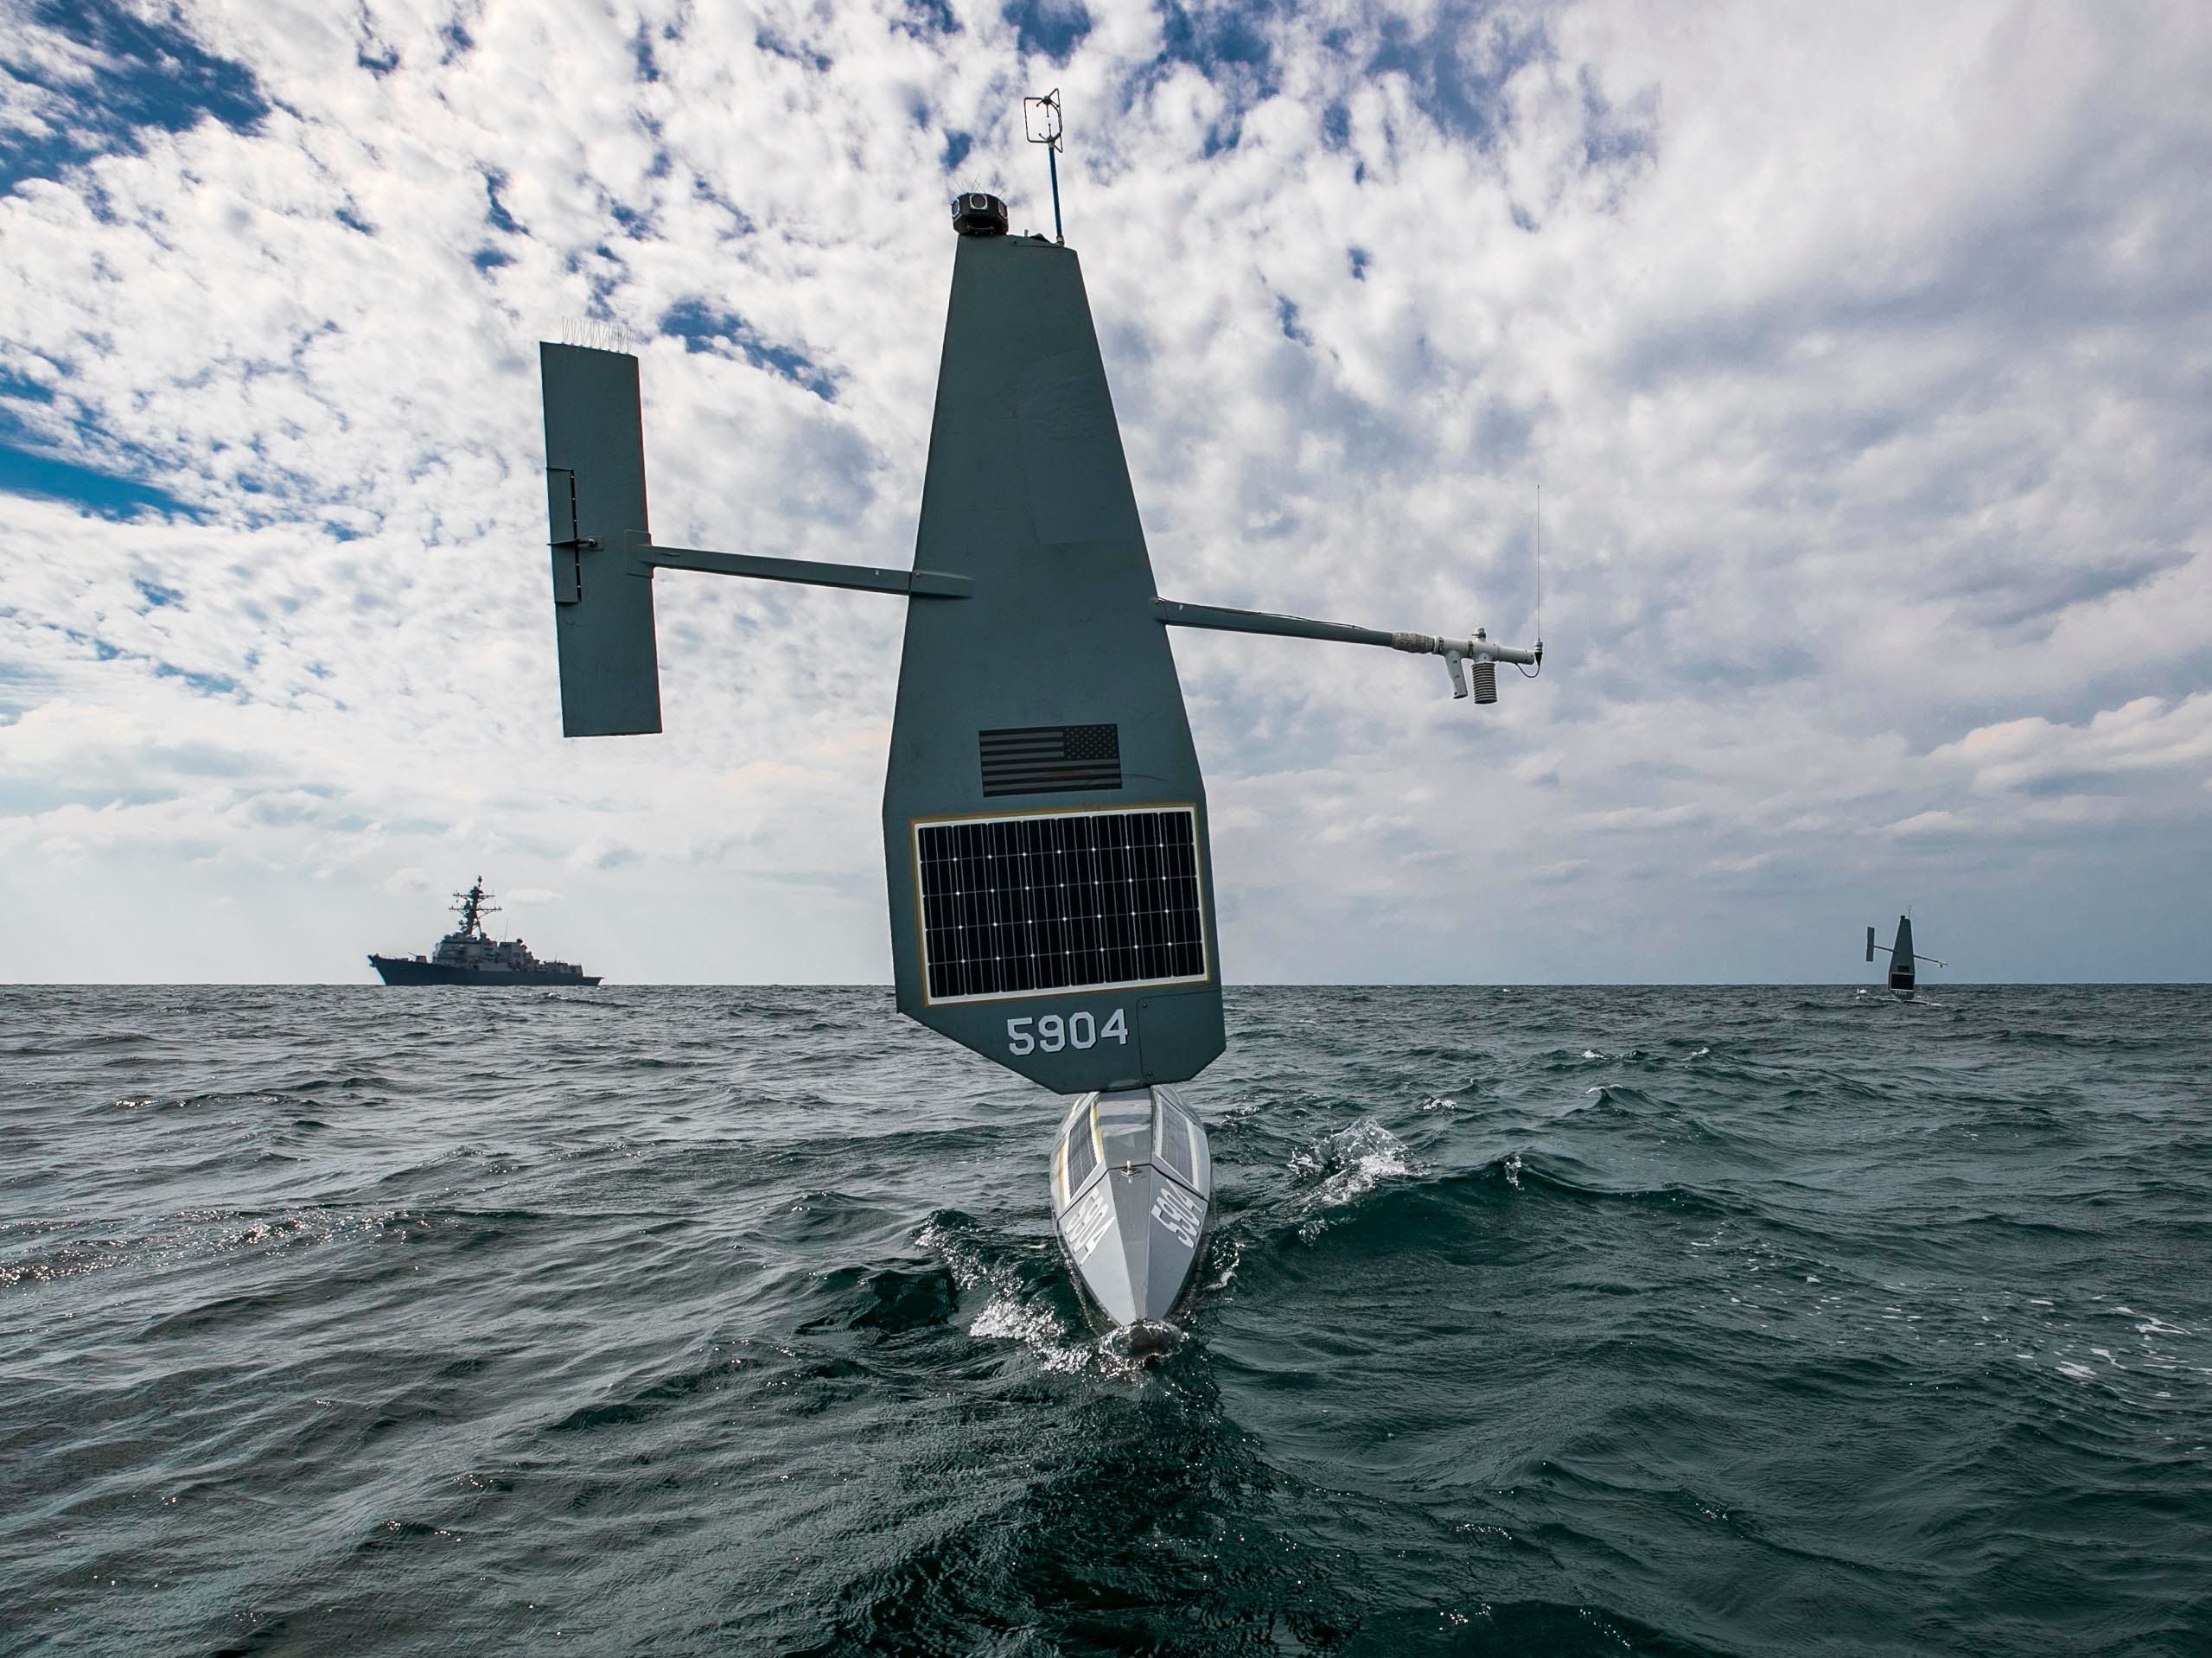 Saildrone USVs, U.S. Destroyer Test How Drones Could ID Objects for Warships Crews